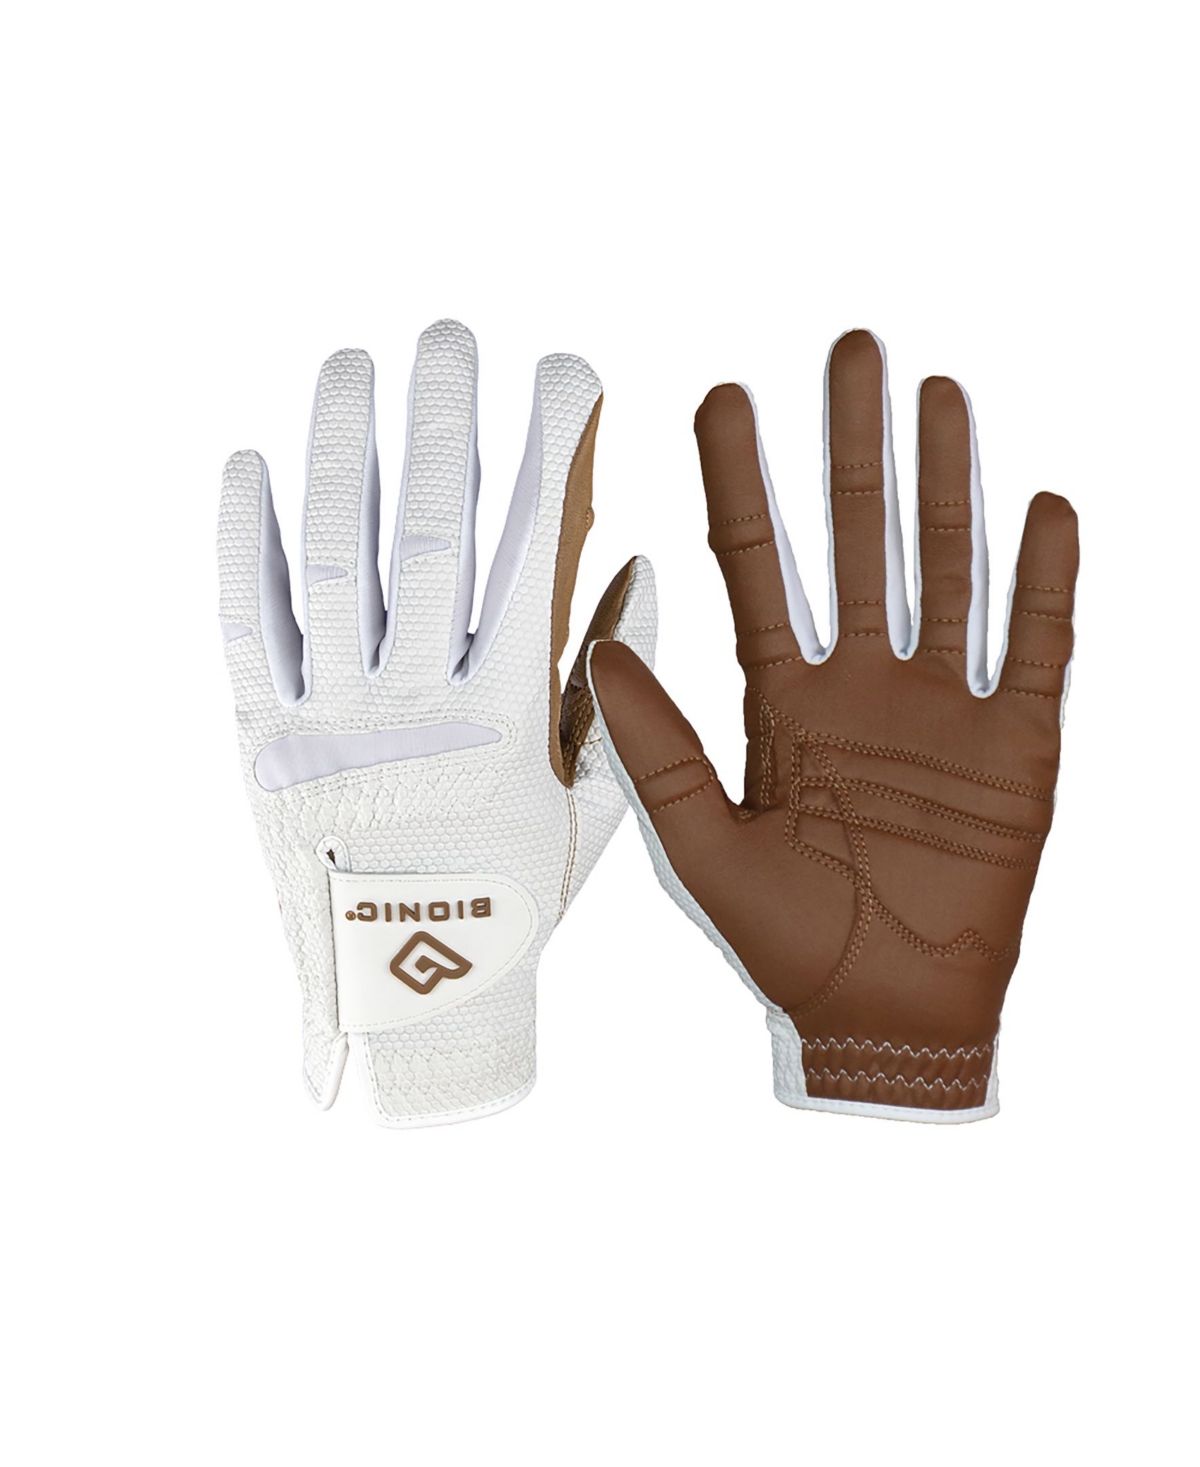 Save 30% on Women's Relax Grip 2.0 Golf Glove - Right Hand